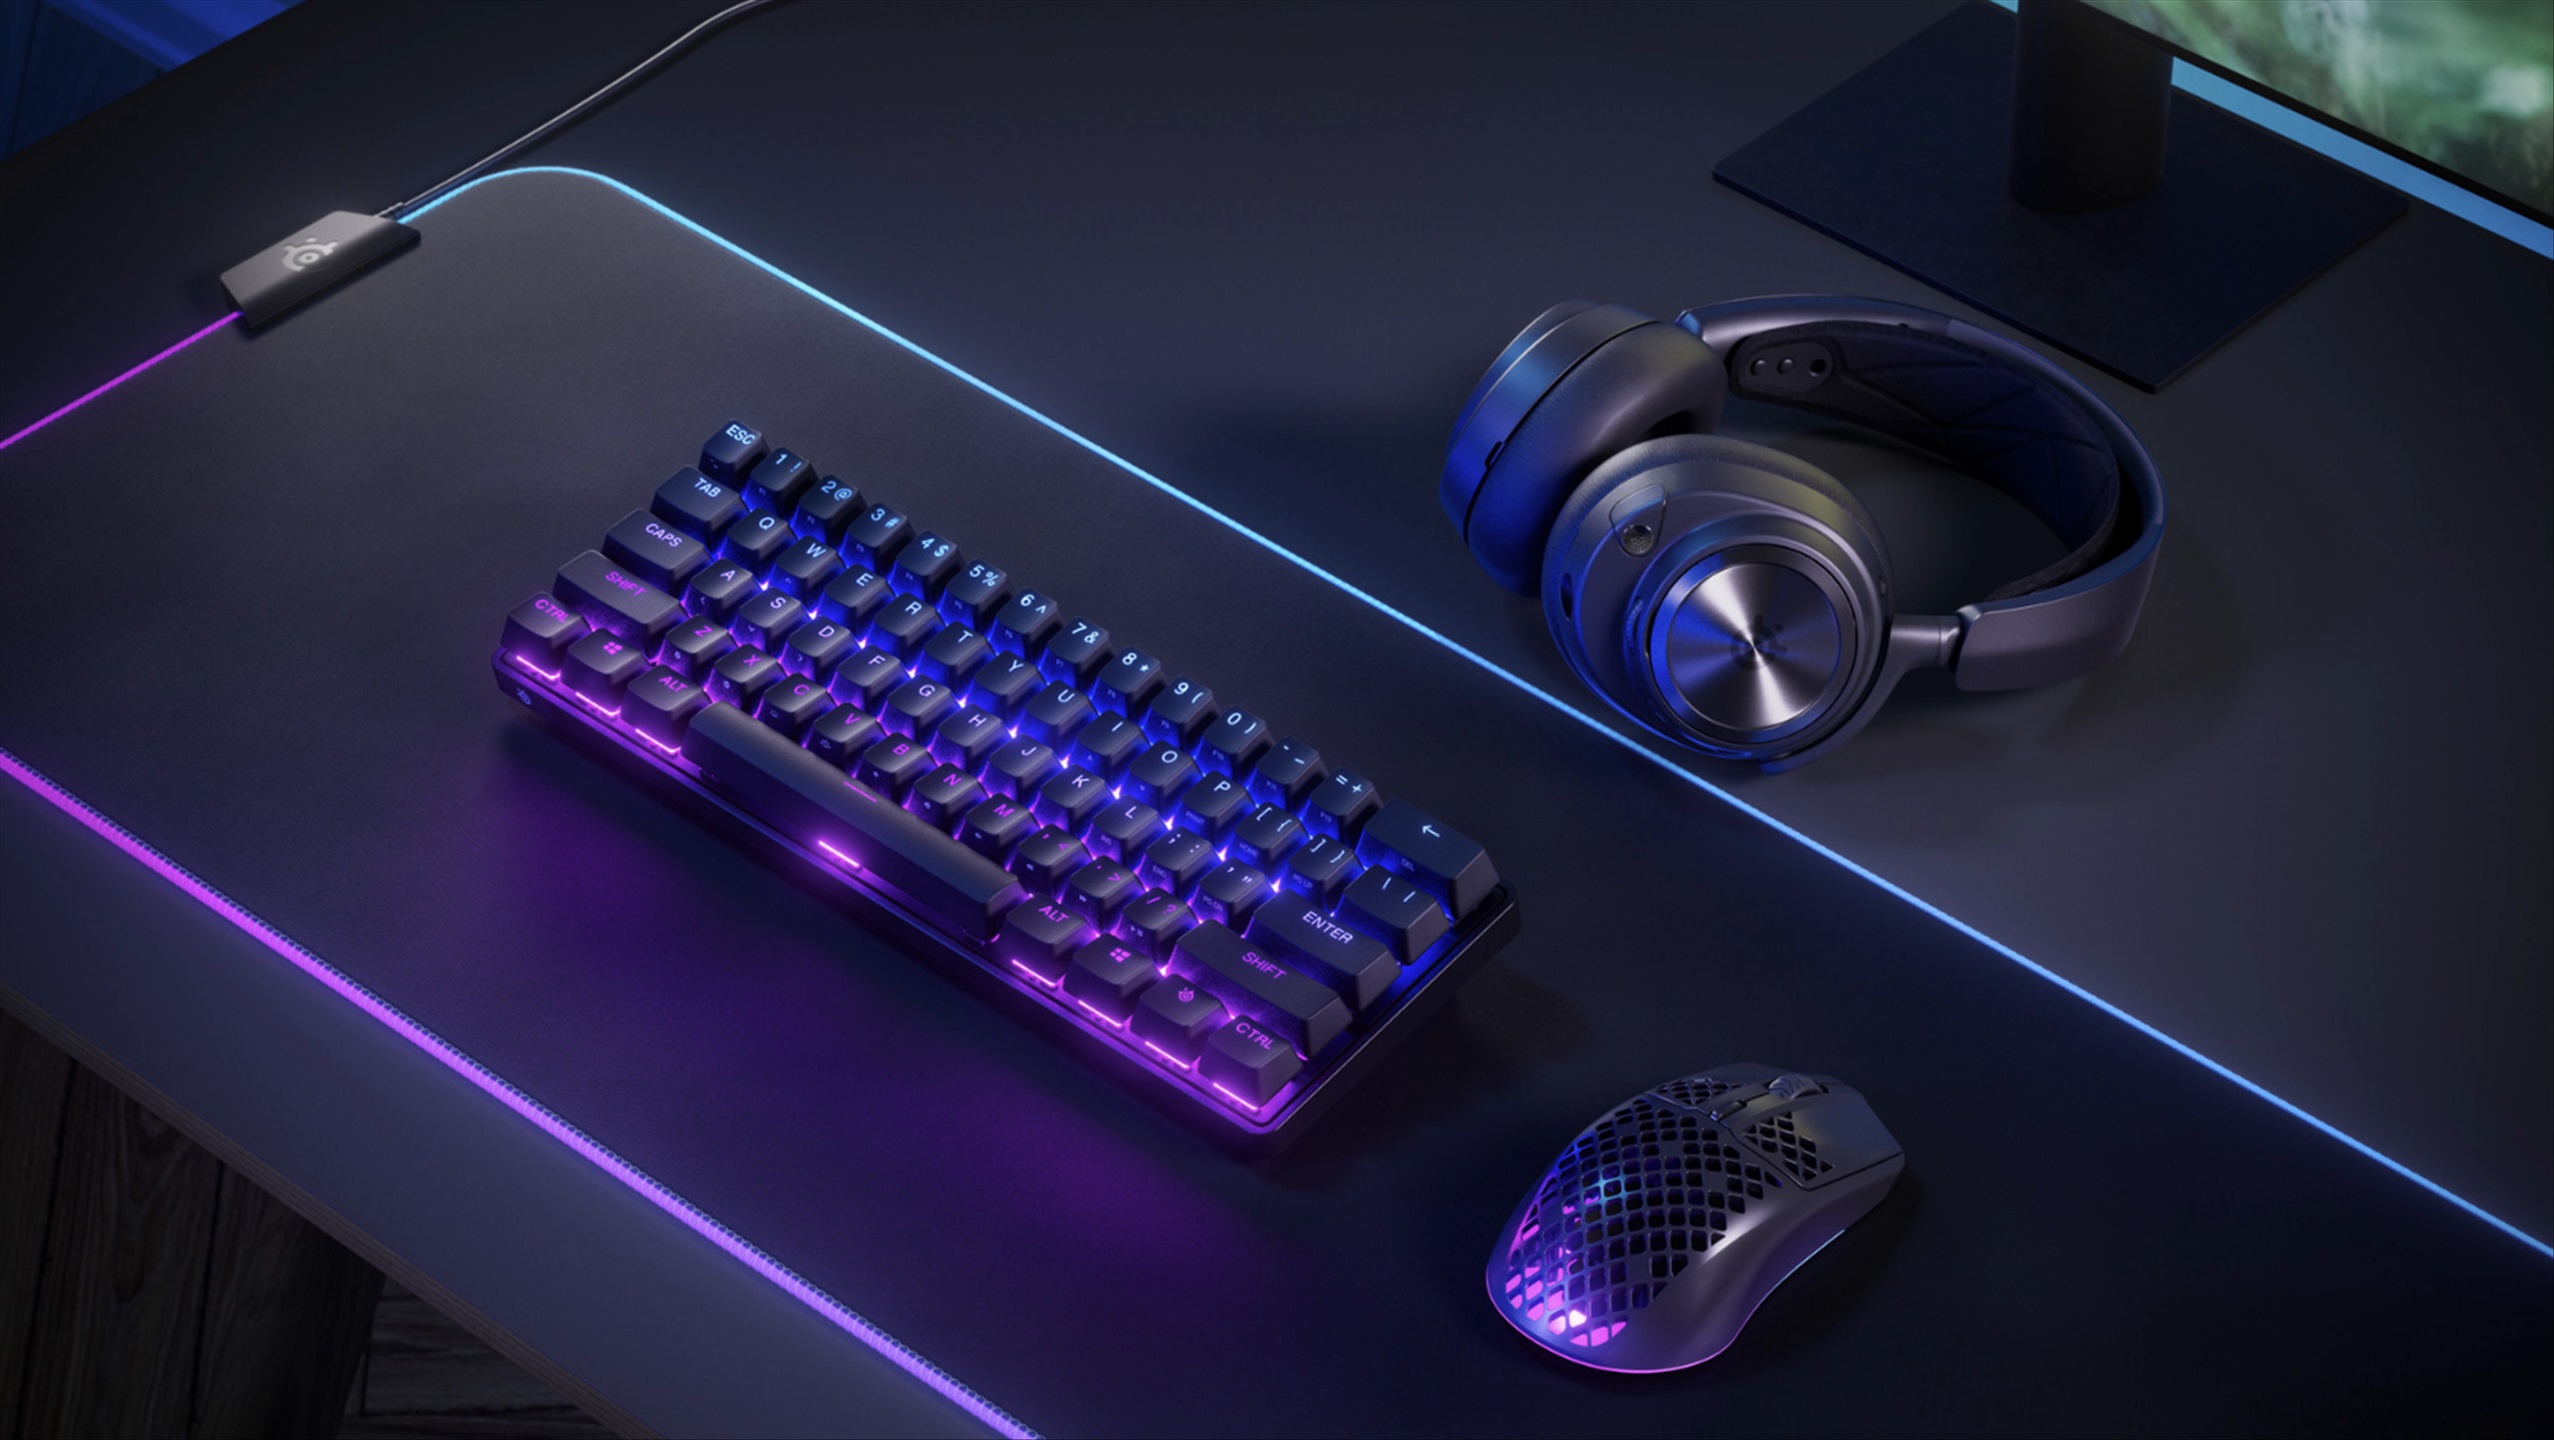 SteelSeries’ flagship gaming keyboard now comes in mini packages with fastest 0.2mm actuation point switches